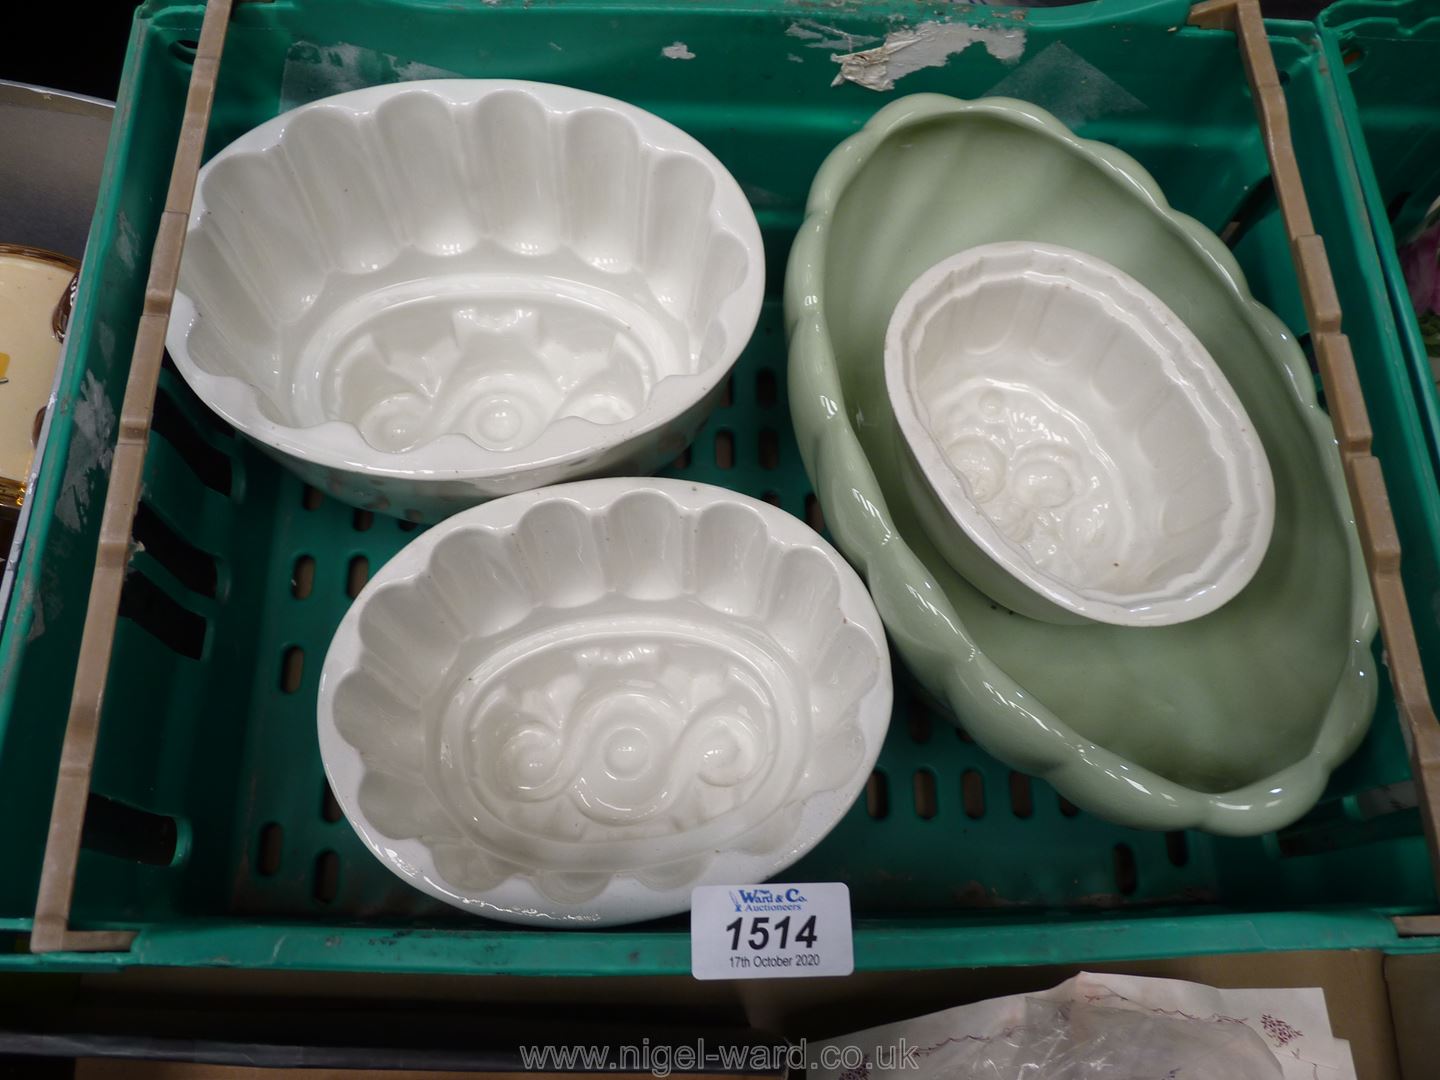 Three jelly moulds and a Beswick vase.